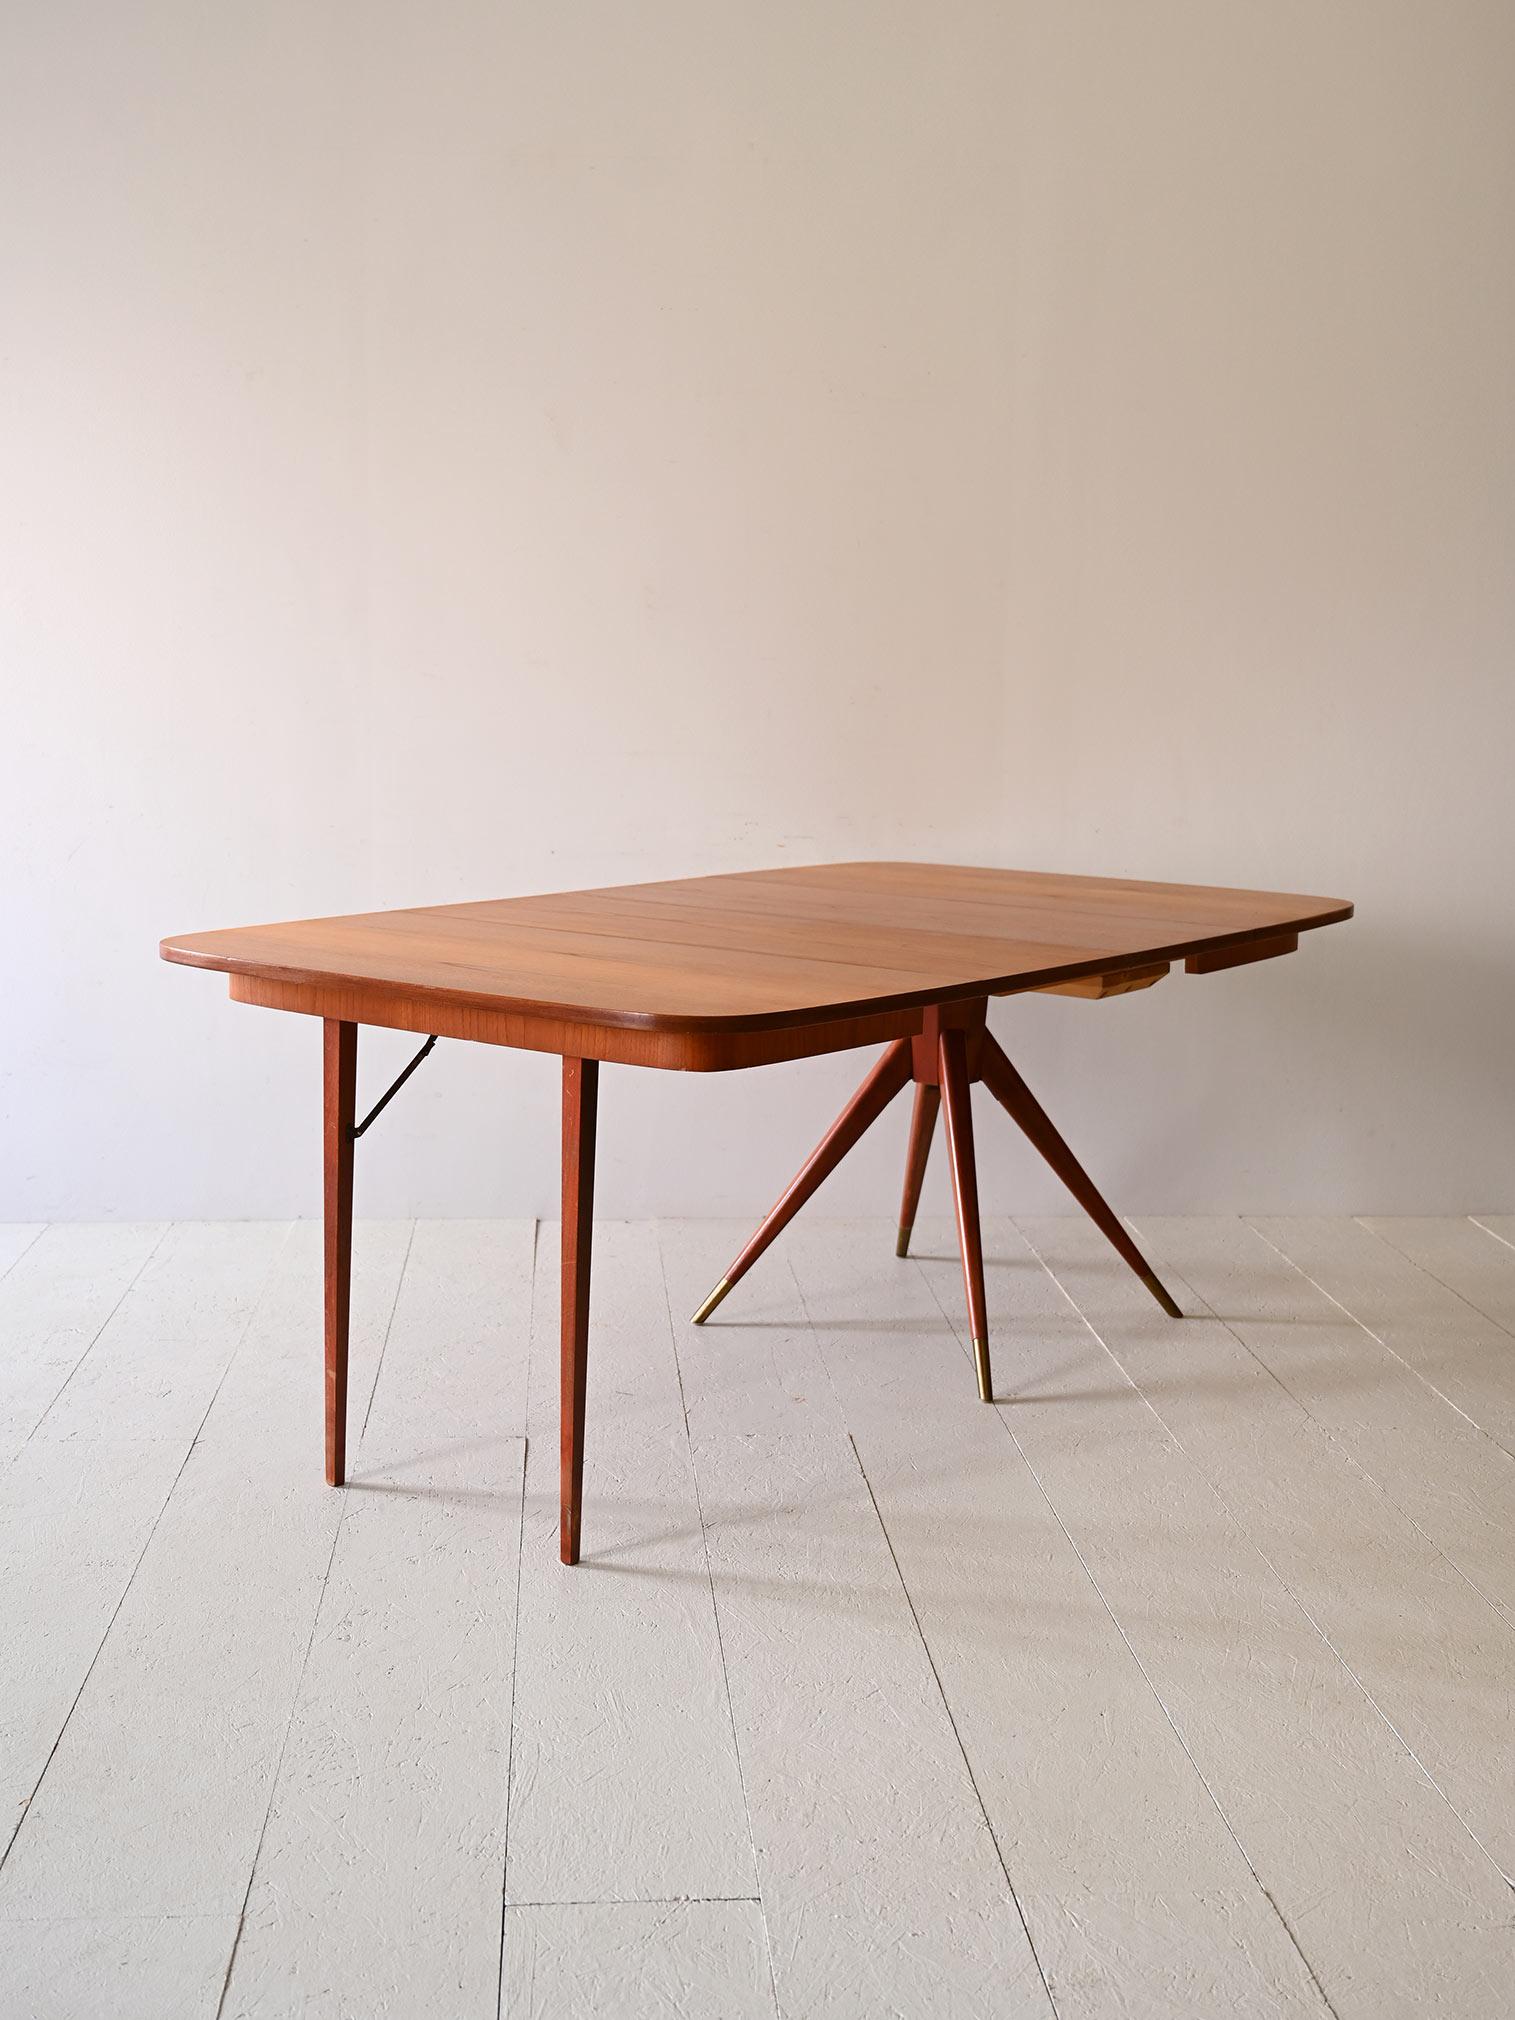 Danish Square table with rounded corners